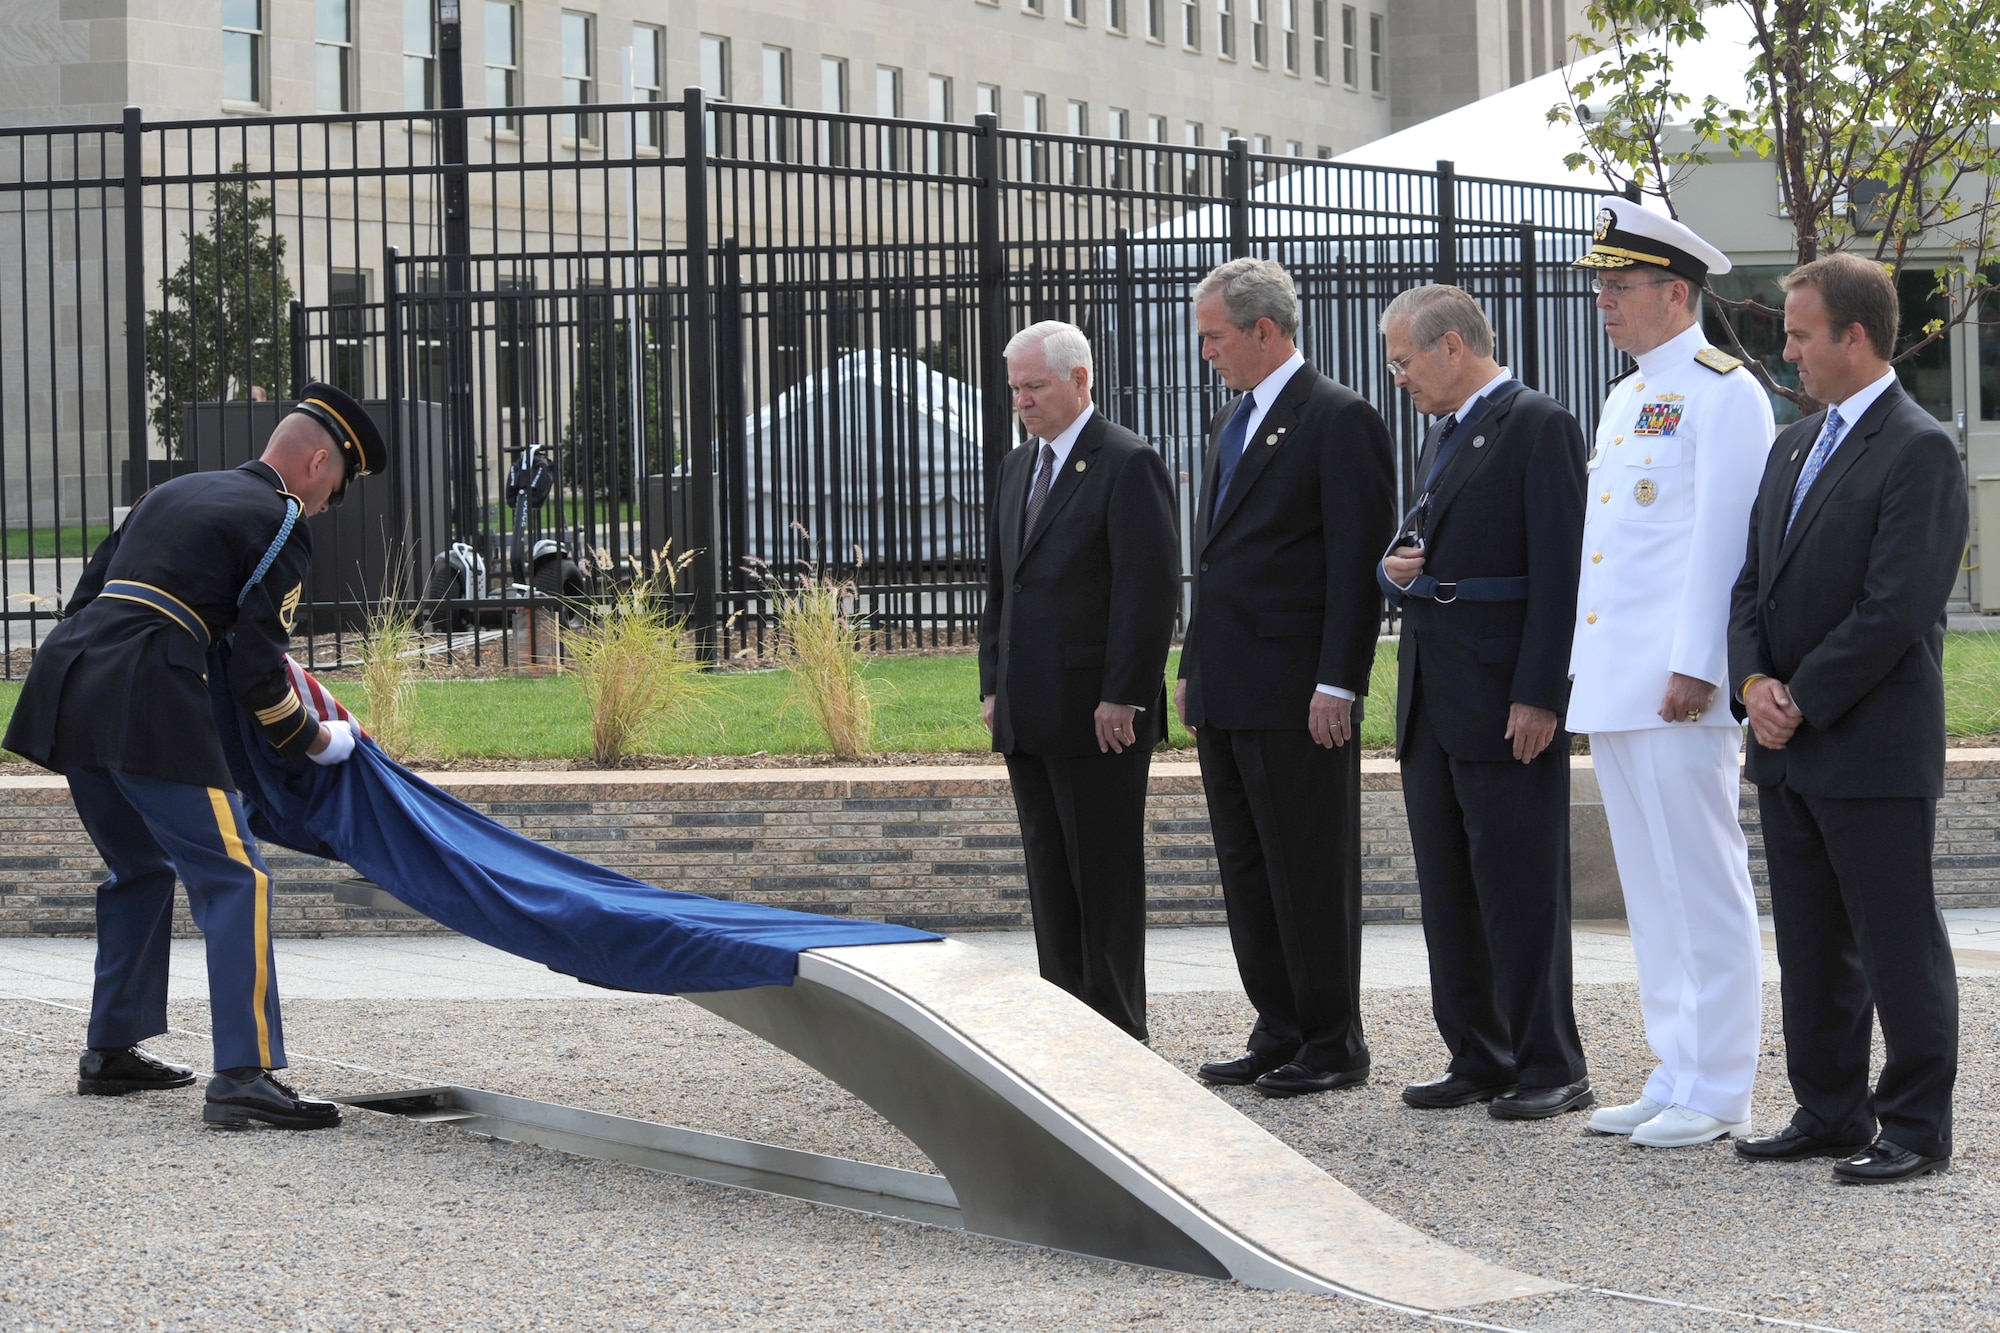 The official party watches as the first inscribed memorial unit is unveiled at the Pentagon Memorial Sept. 11 in Alexandria, Va. The national memorial is the first to be dedicated to those killed at the Pentagon on Sept. 11, 2001. The site contains 184 inscribed memorial units honoring the 59 people aboard American Airlines Flight 77 and the 125 in the building who lost their lives that day. (Defense Department photo/Cherie Cullen)